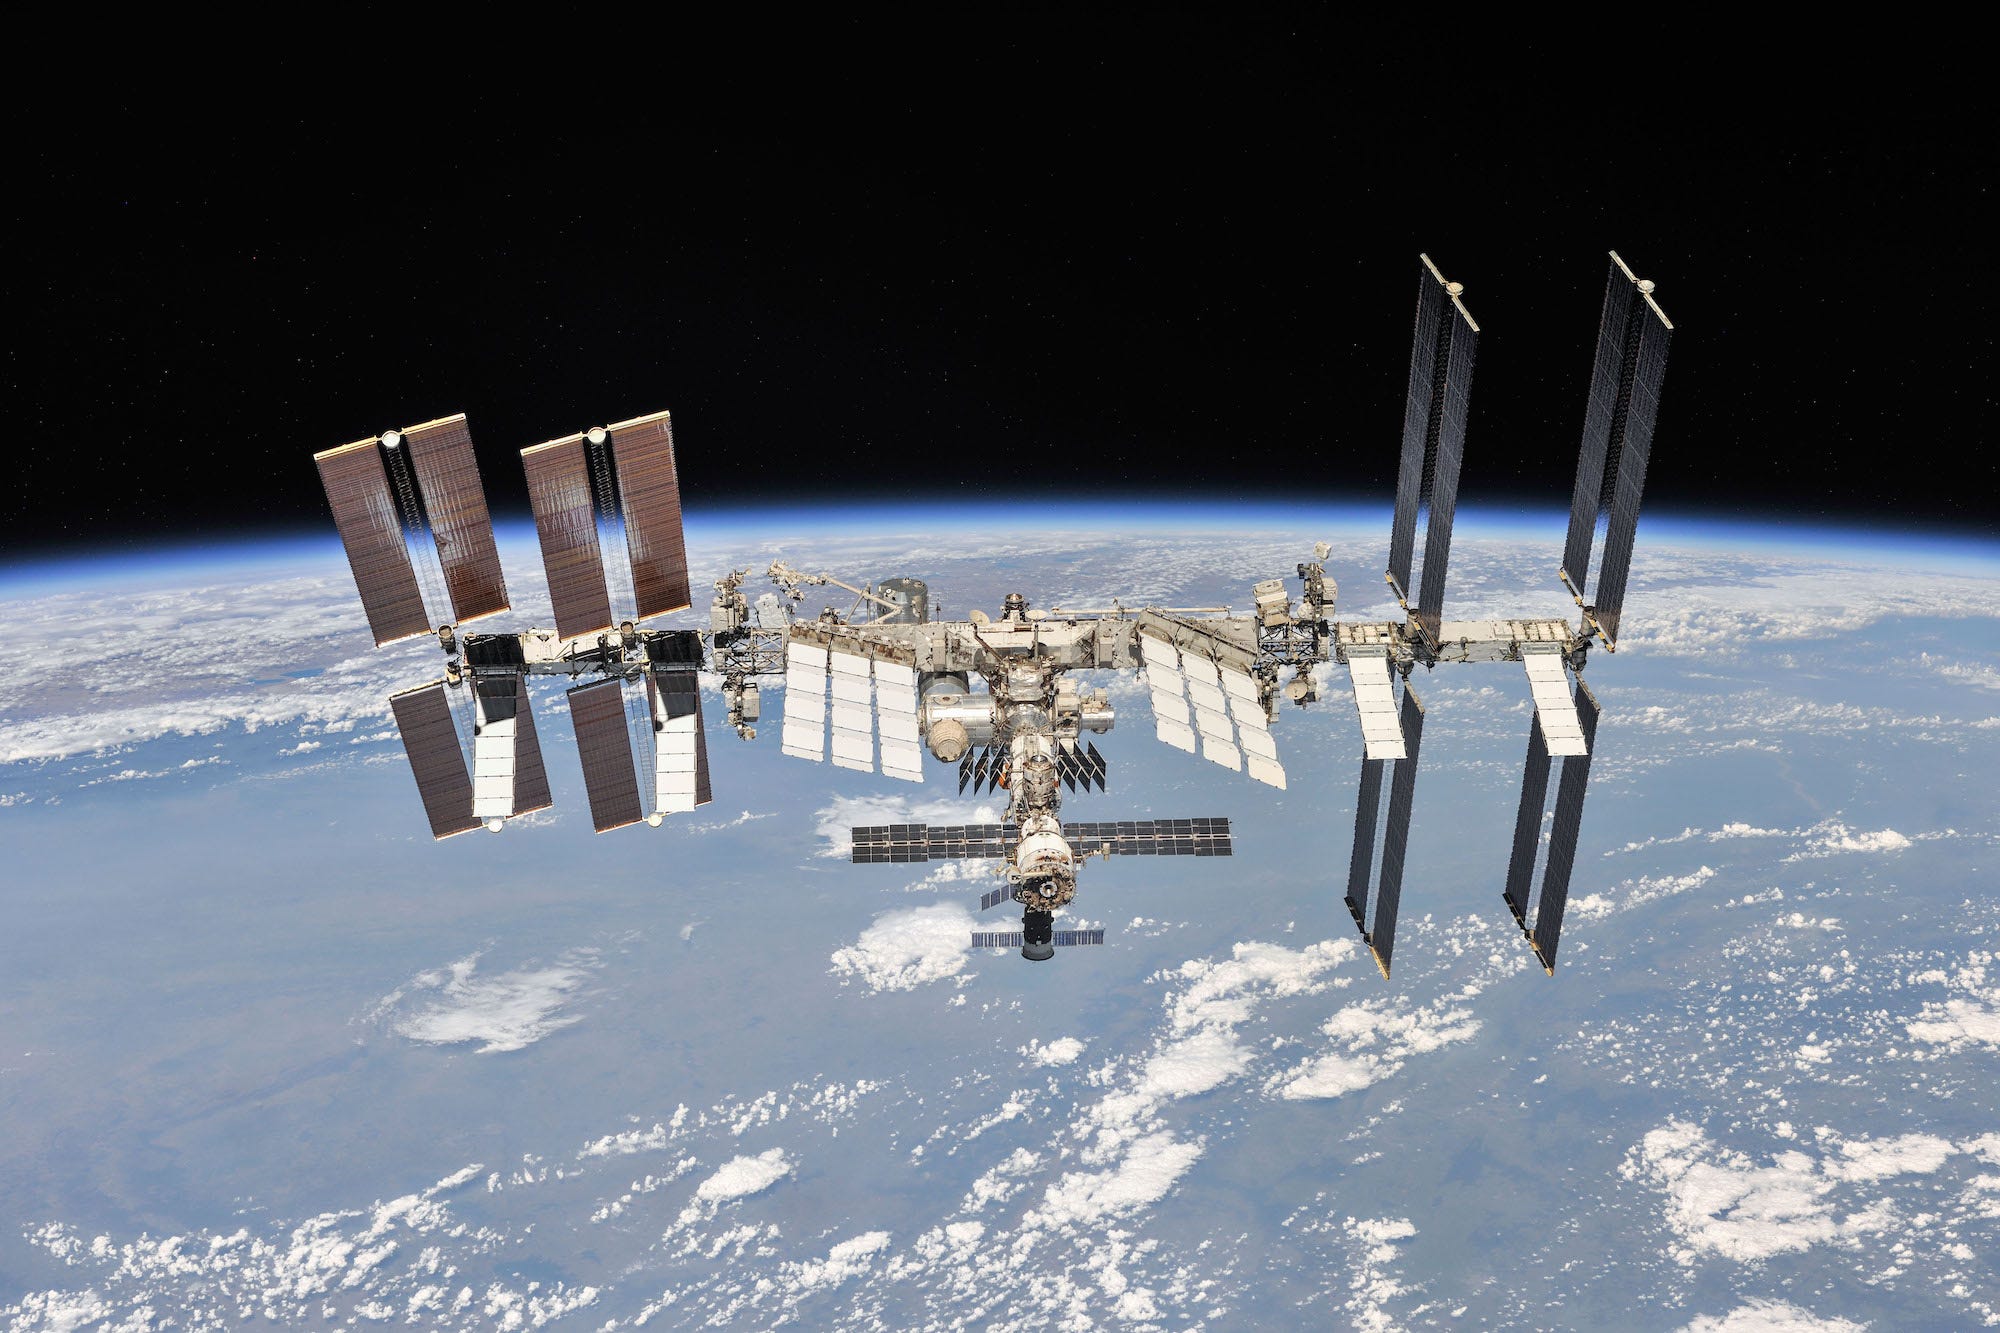 ISS The International Space Station as of Oct. 4, 2018